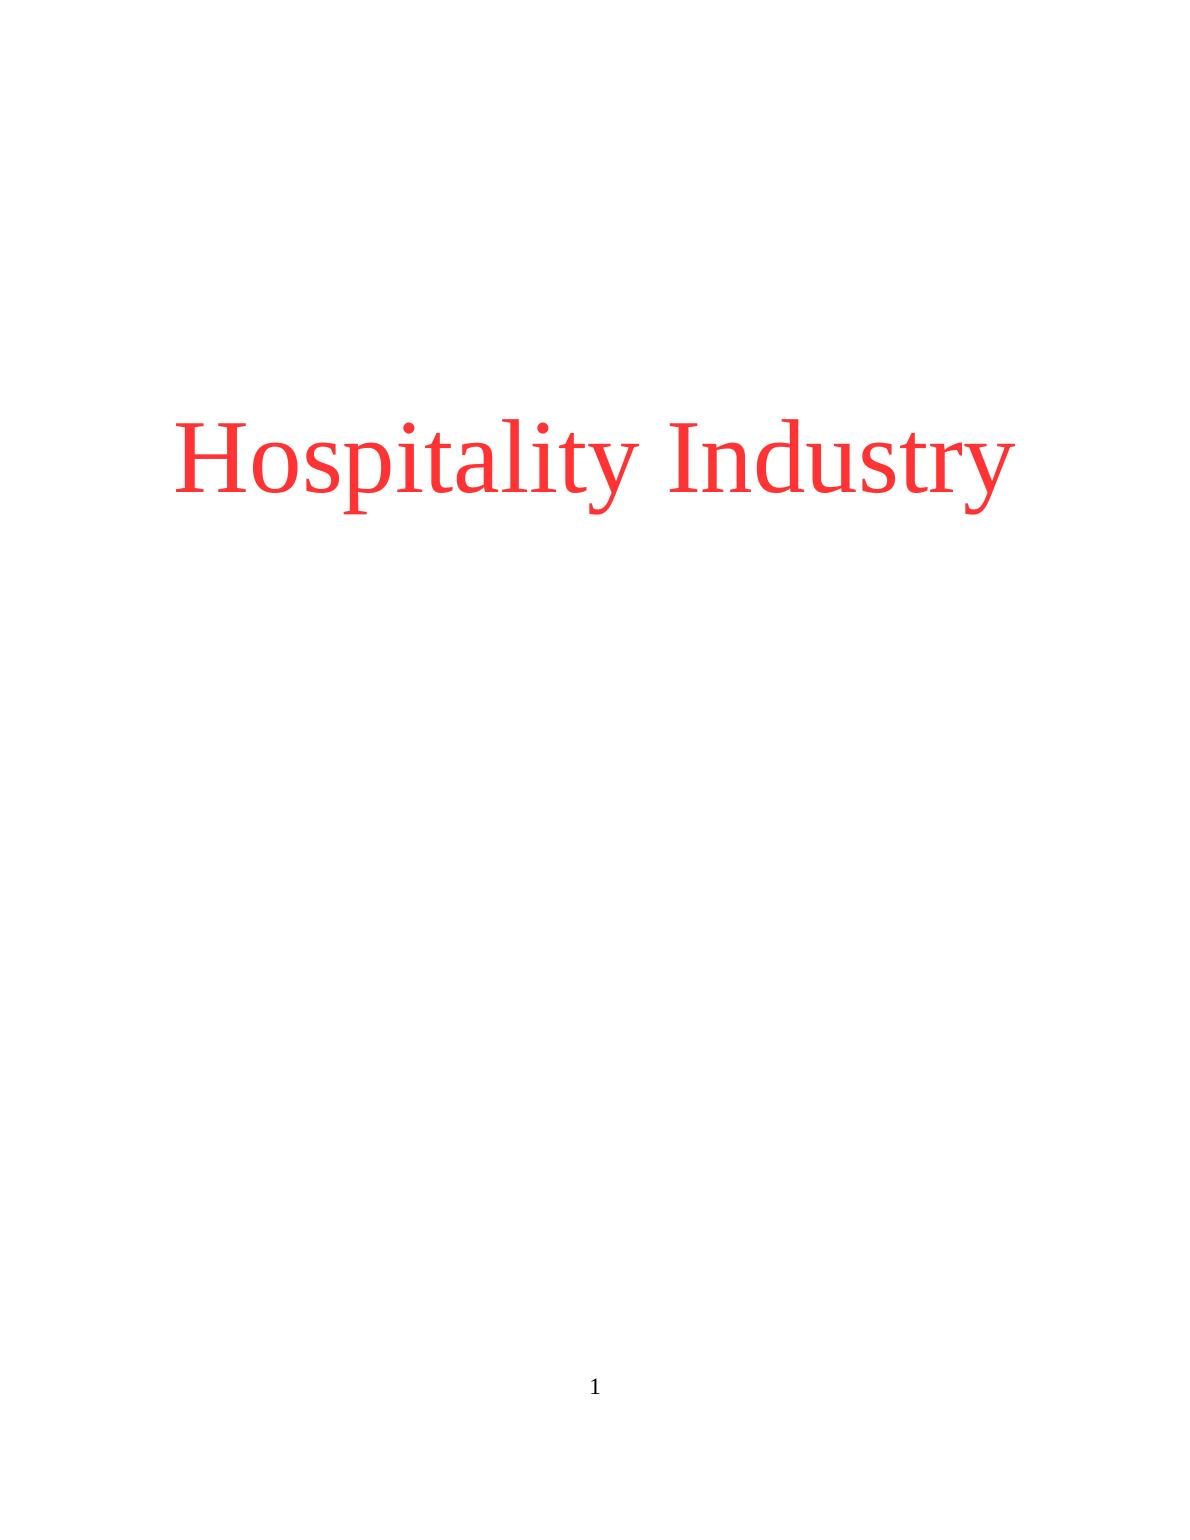 Scope Of Hospitality Industry In The UK_1